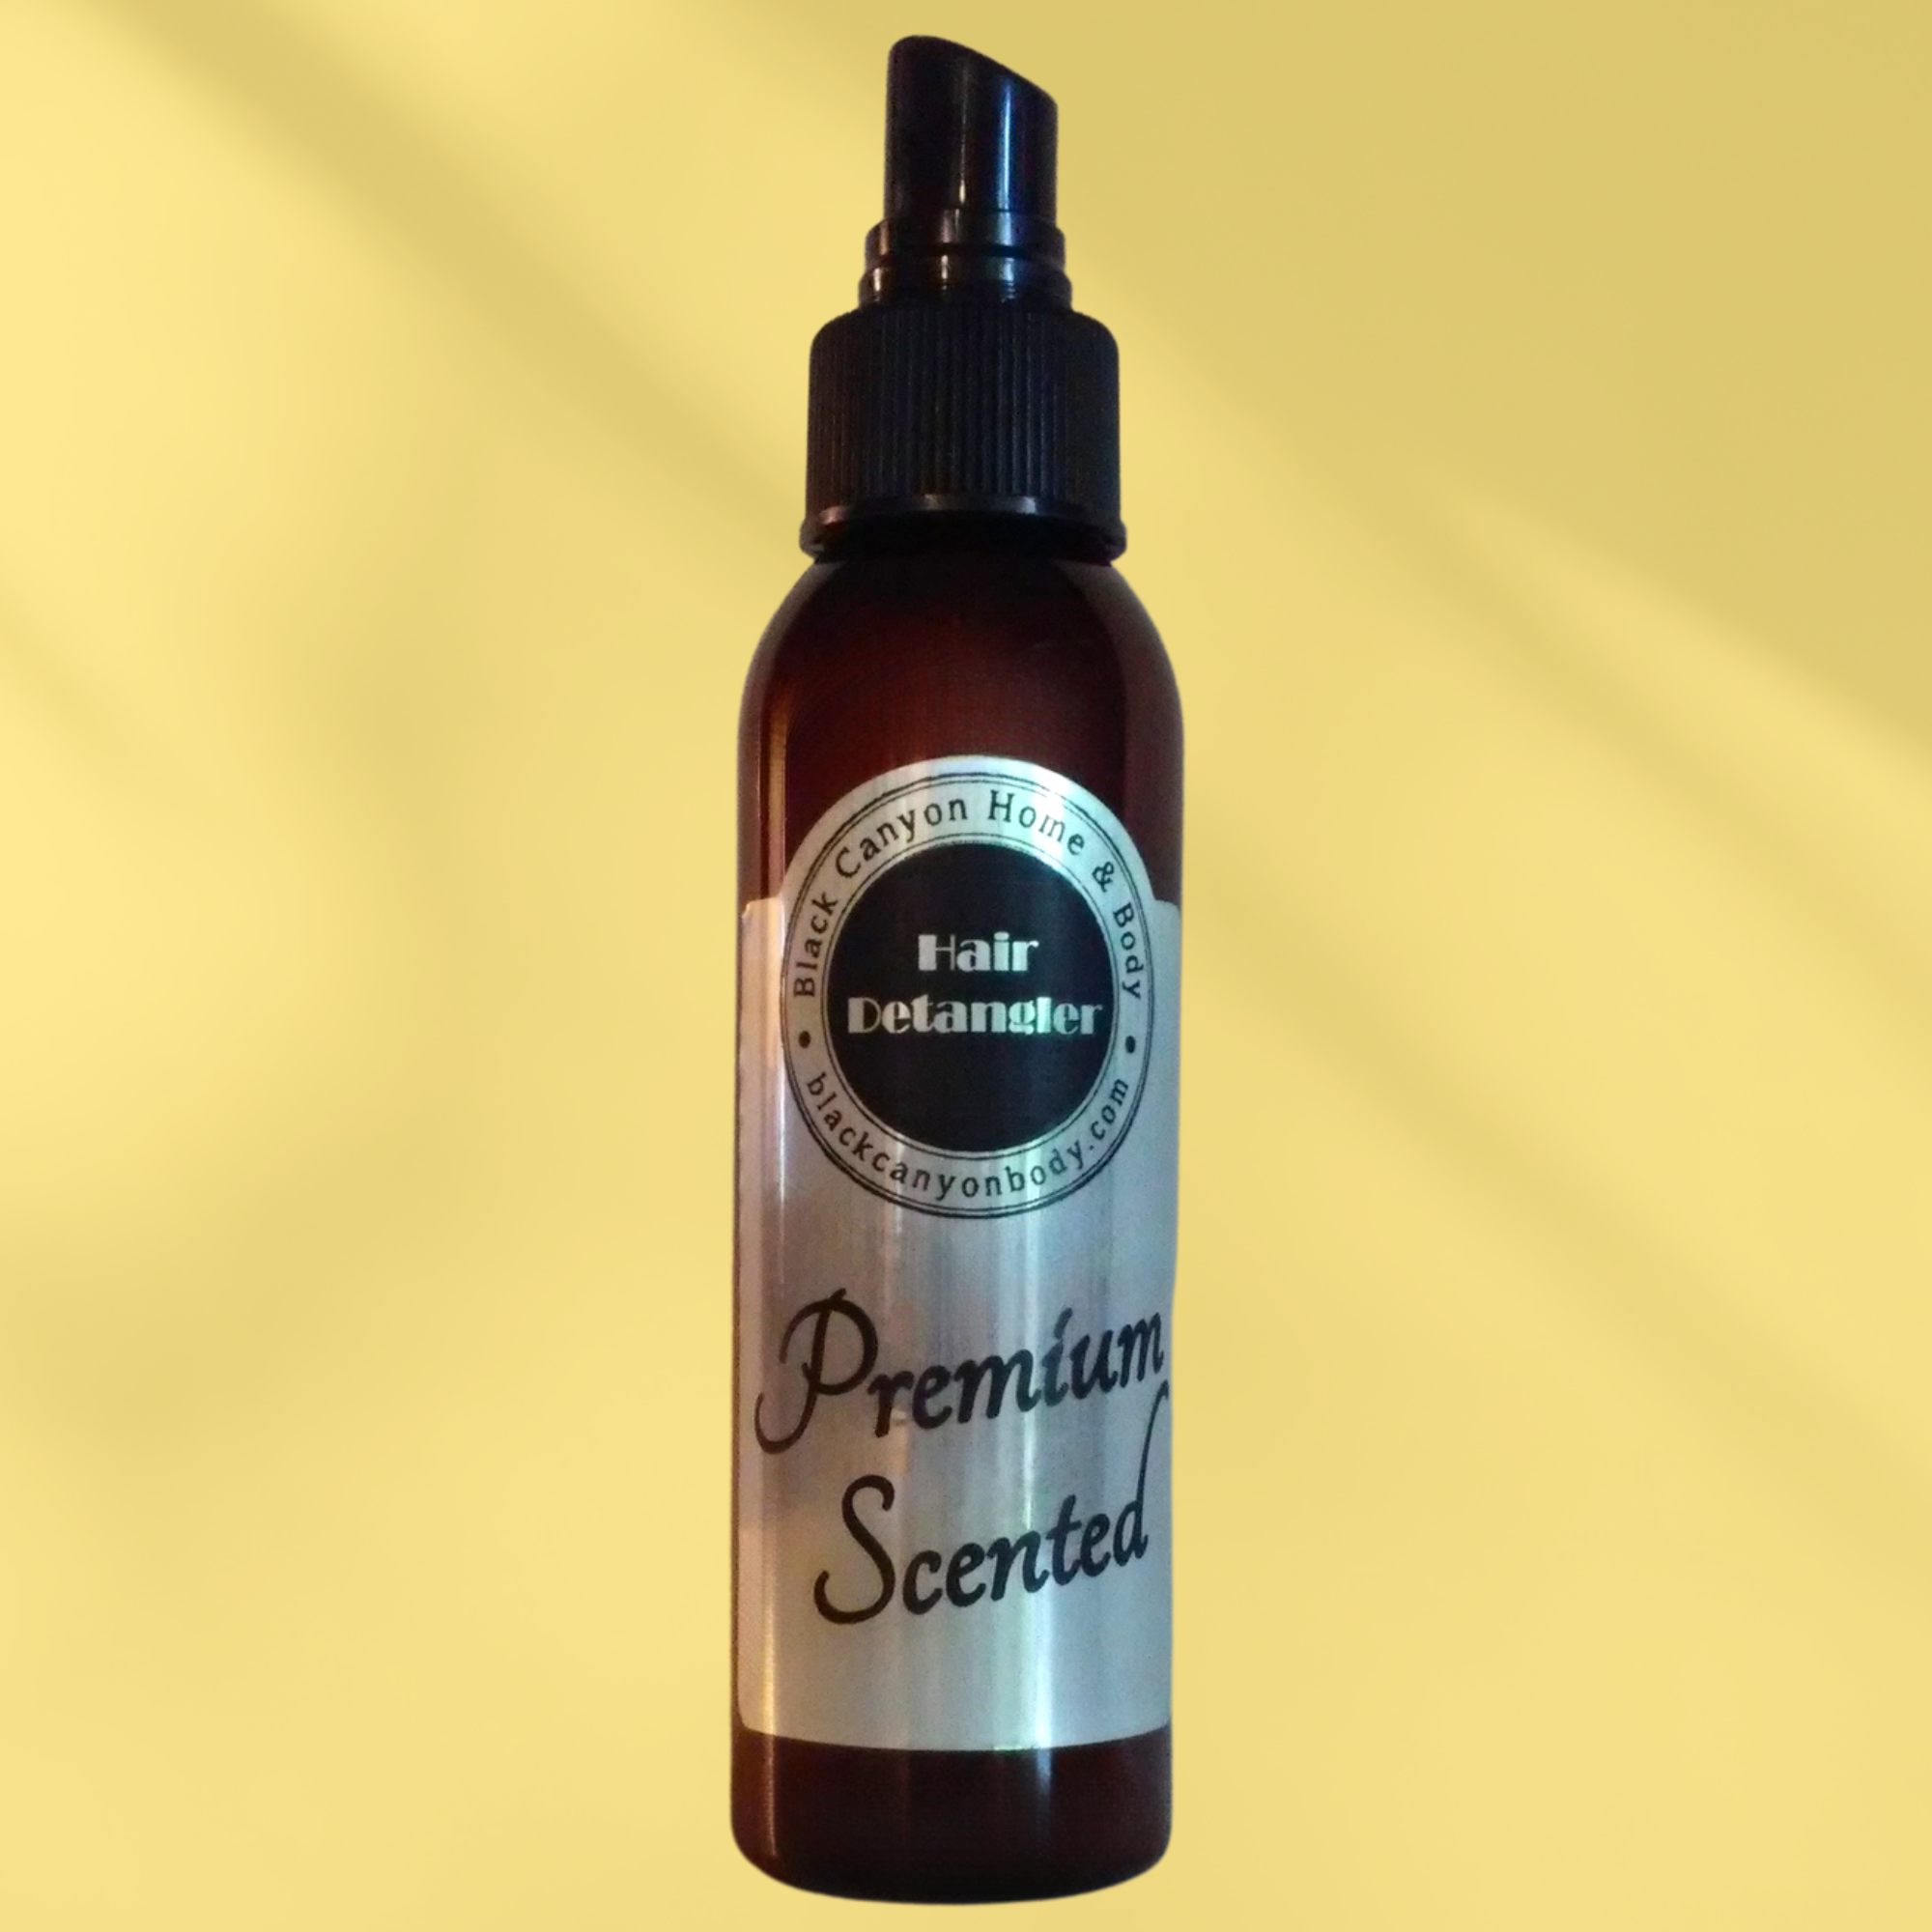 Black Canyon Caramel Pecan Surprise Scented Hair Detangler Spray with Olive Oil